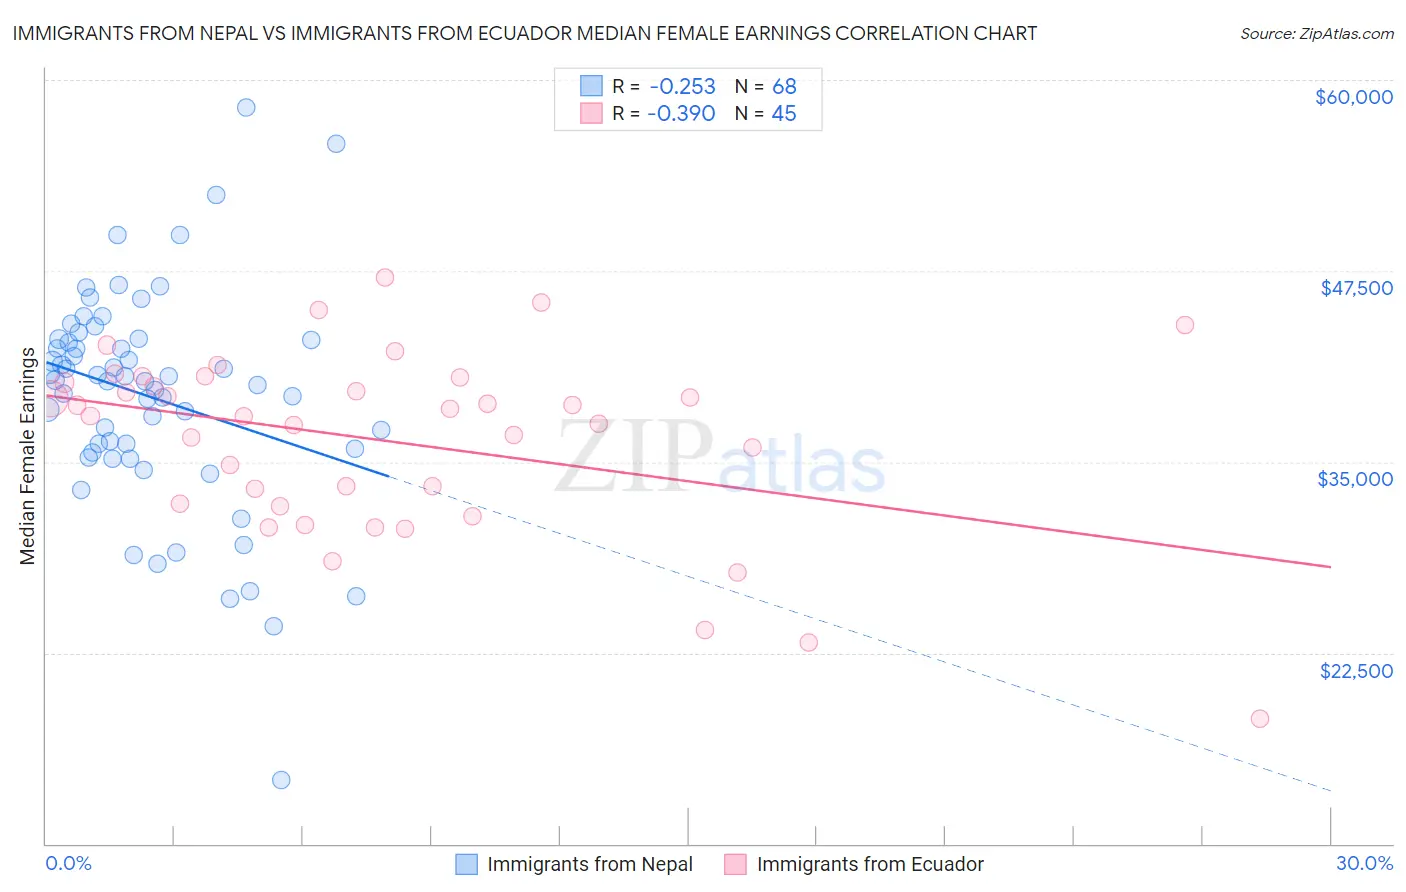 Immigrants from Nepal vs Immigrants from Ecuador Median Female Earnings